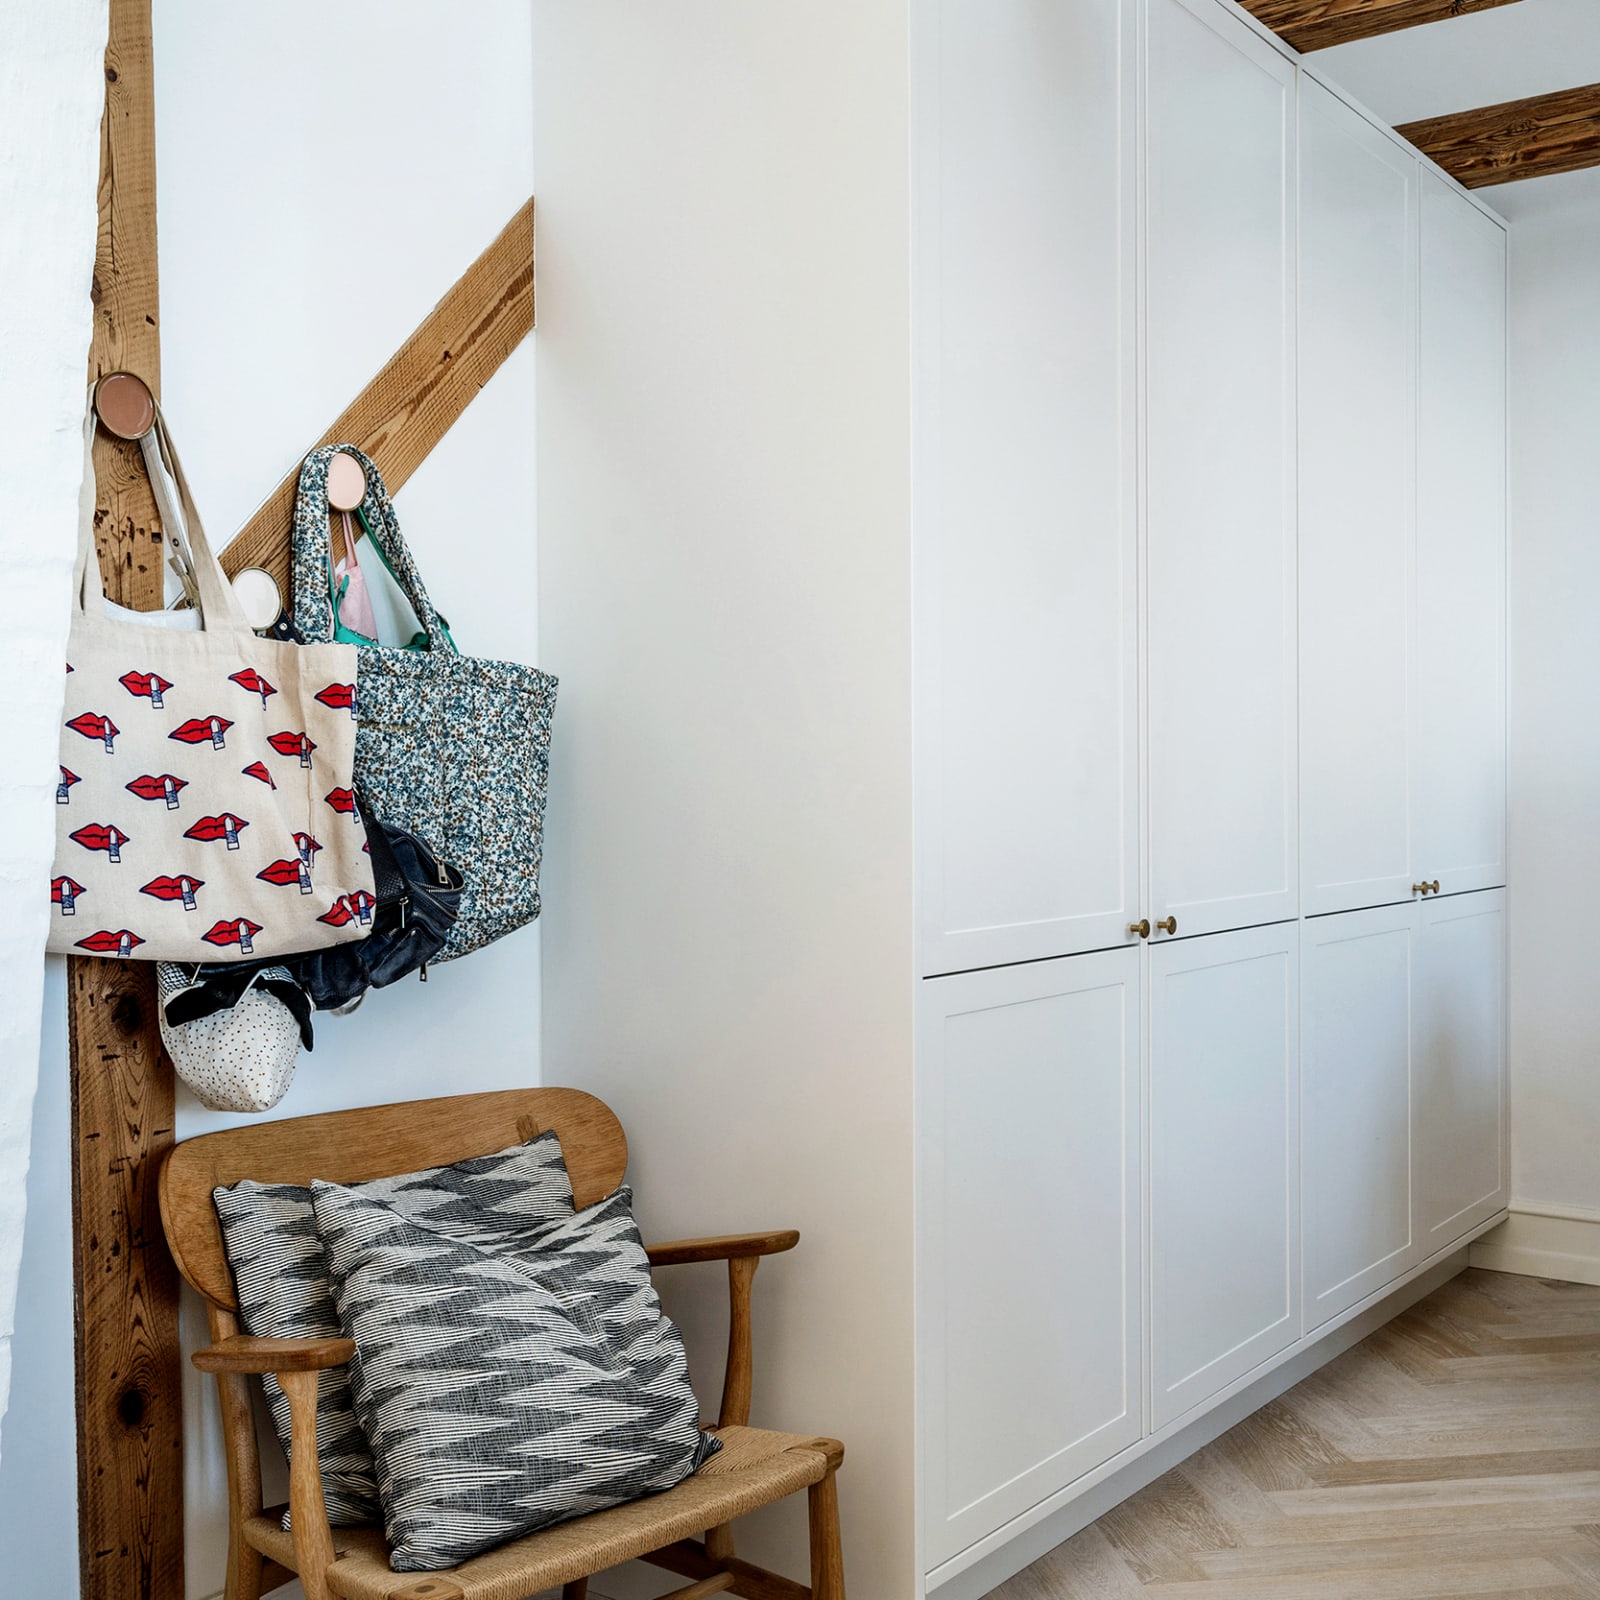 The bespoke wardrobe fits in seamlessly beneath the exposed beams